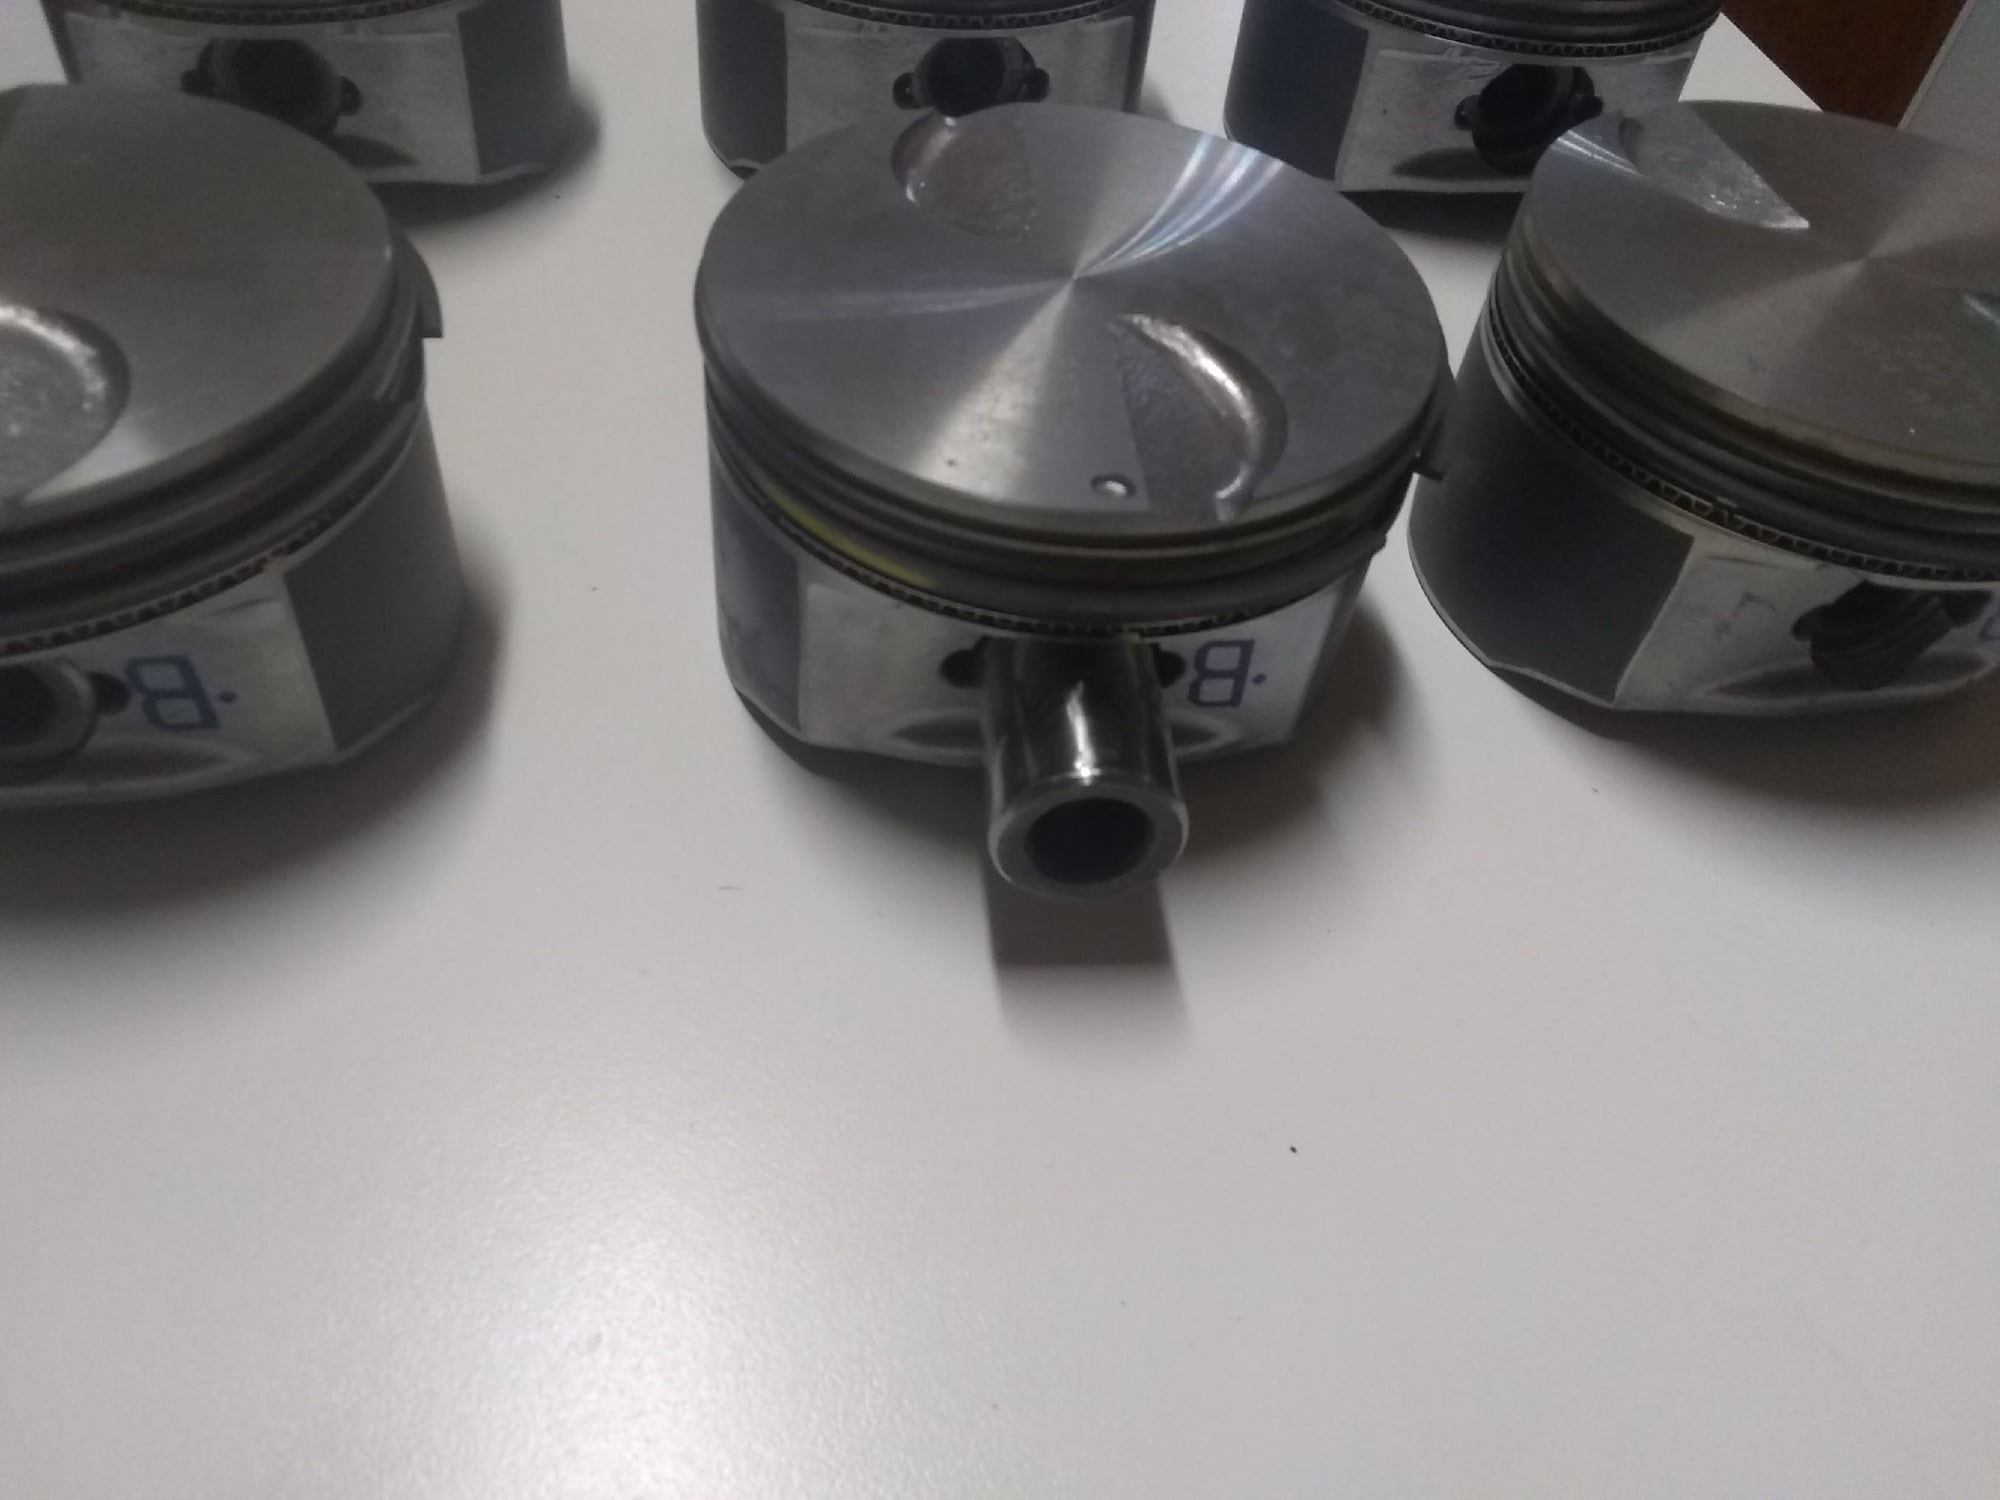 Engine - Internals - Selling: LH6 Gen 4 factoy GM pistons with rings, wrist pins, and locks - Used - Manchaca, TX 78652, United States